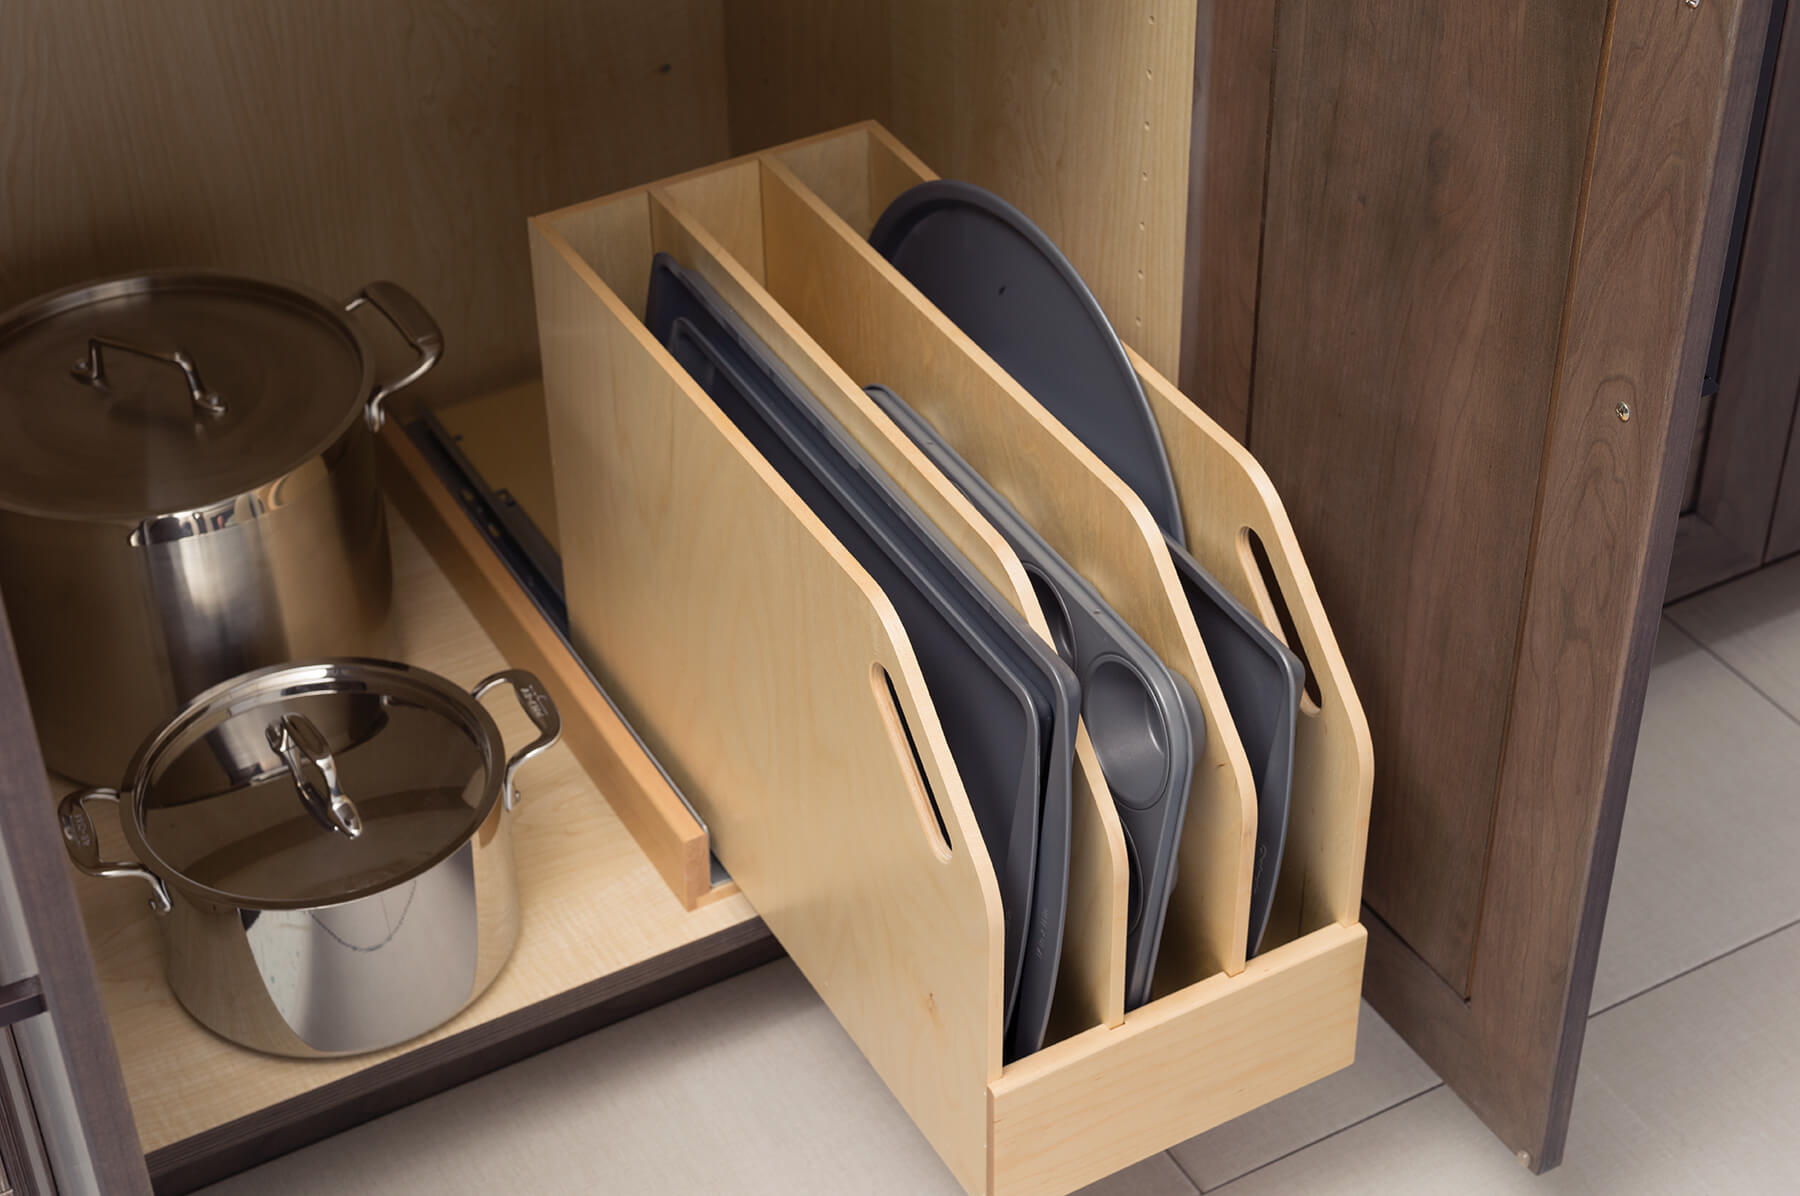 Trays, Pans, and cutting boards can be stored in a roll-out Tray Divider Pull-Out for practical and convenient use of space in a base cabinet.